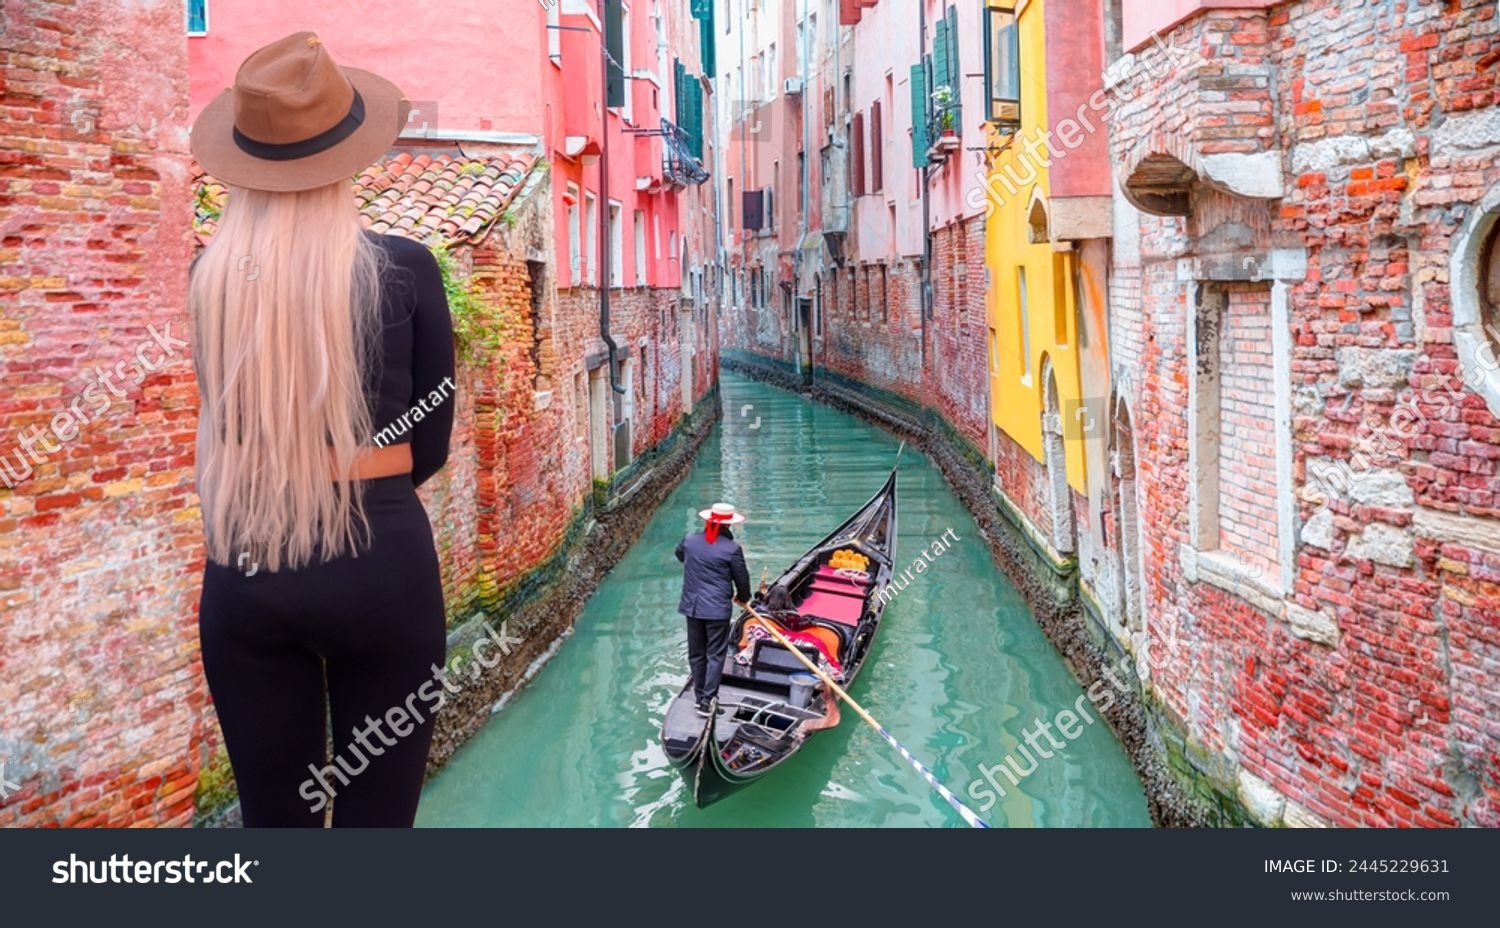 A stylish blonde woman on the bridge watching the Venetian gondolier - Venetian gondolier punting gondola through green canal waters of Venice Italy #2445229631